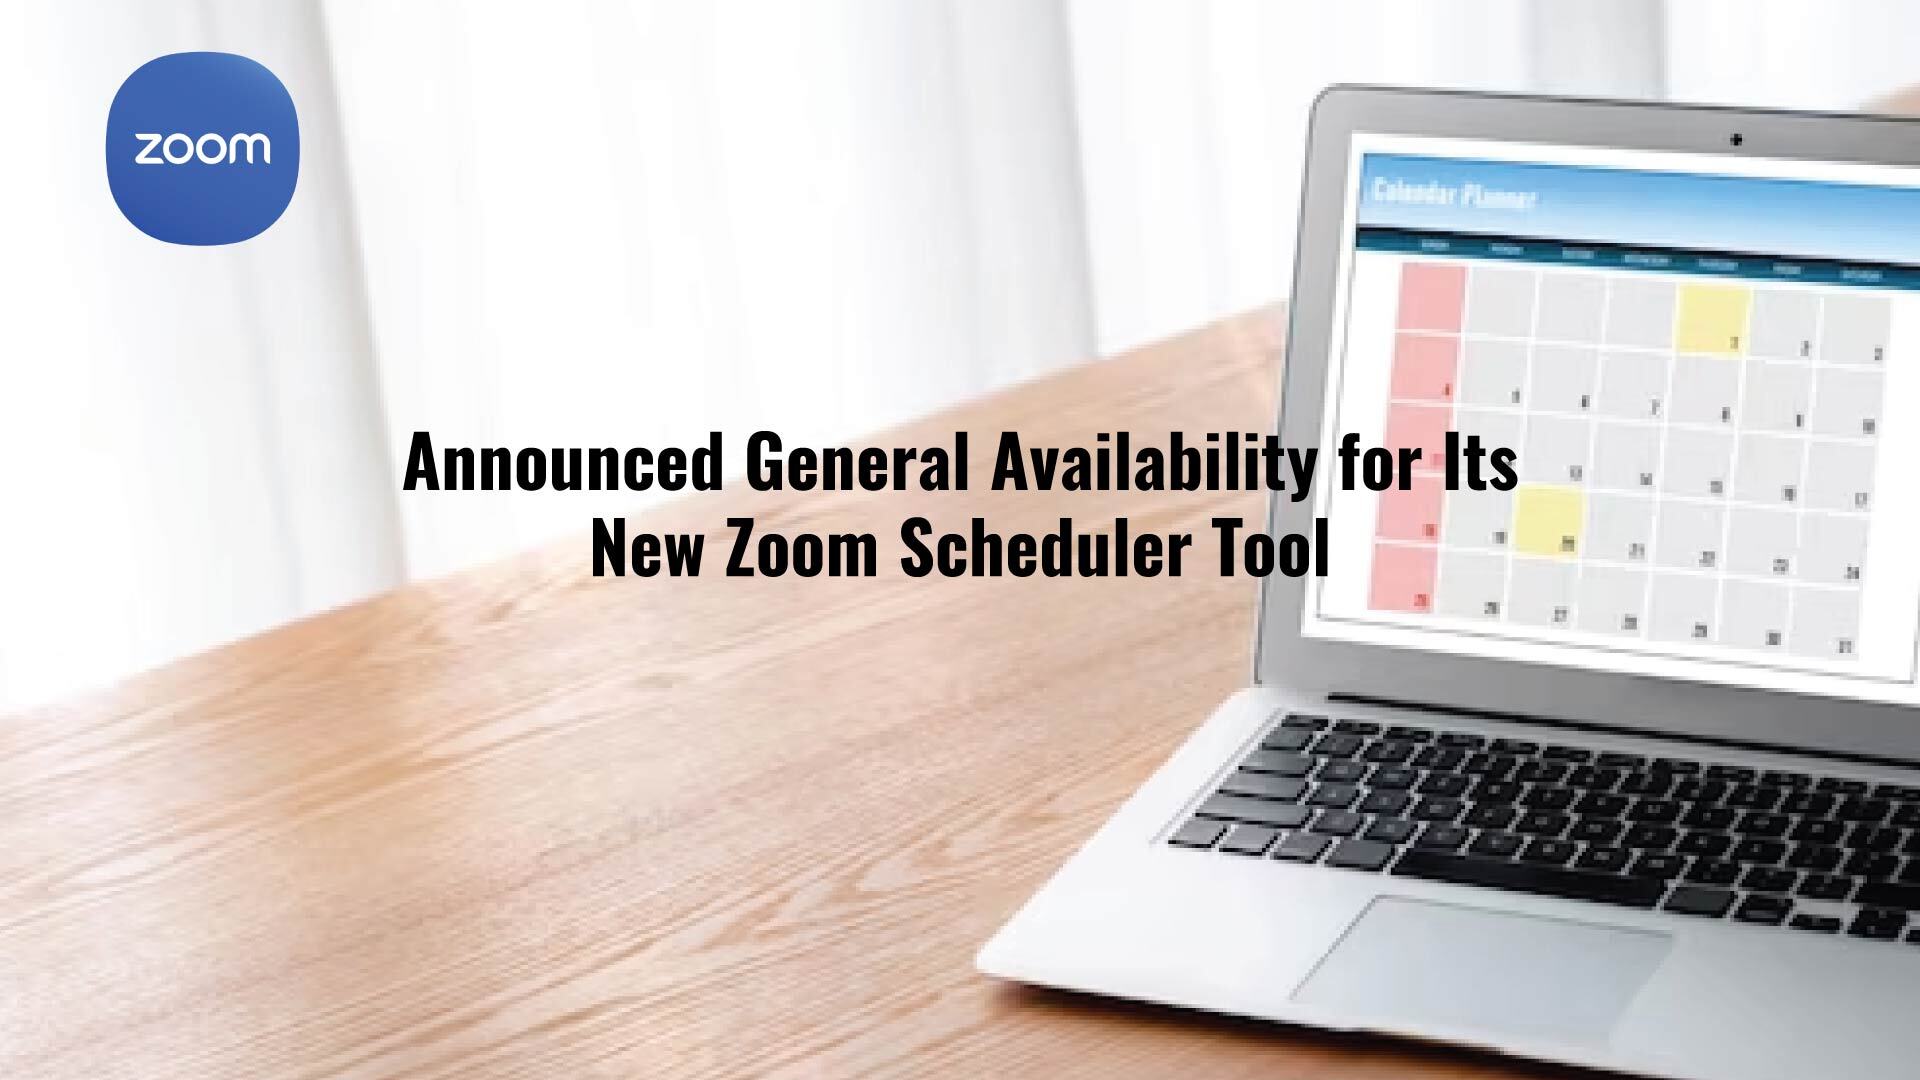 Zoom Scheduler, now generally available, allows users to align calendars with clients and contacts quickly and easily